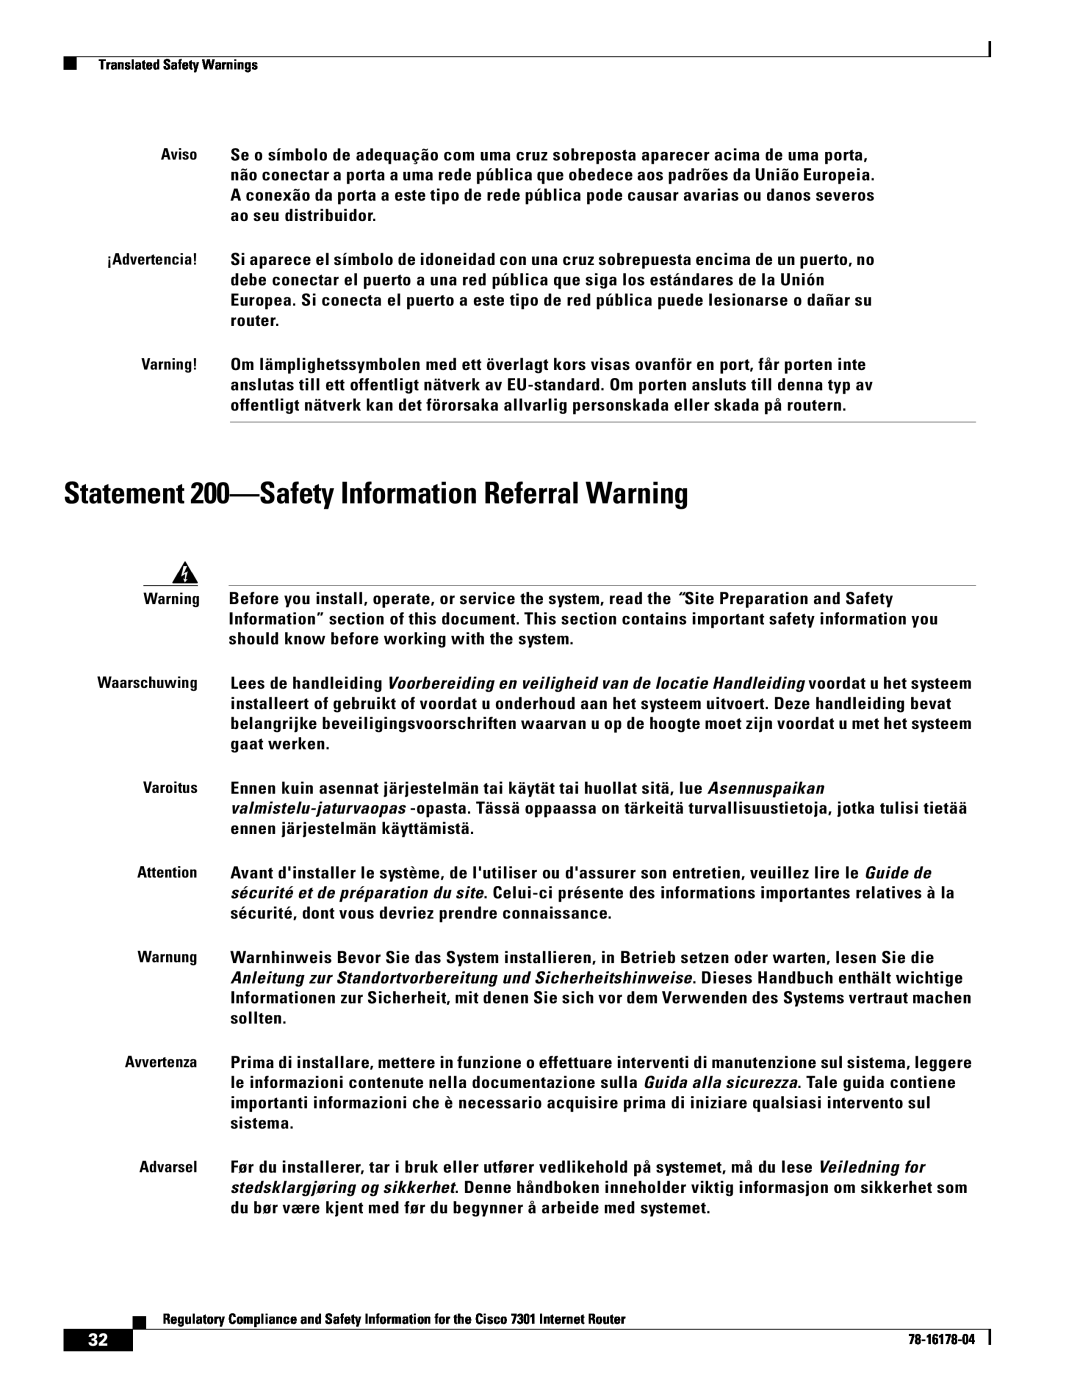 Cisco Systems CISCO7301 manual Statement 200-Safety Information Referral Warning 